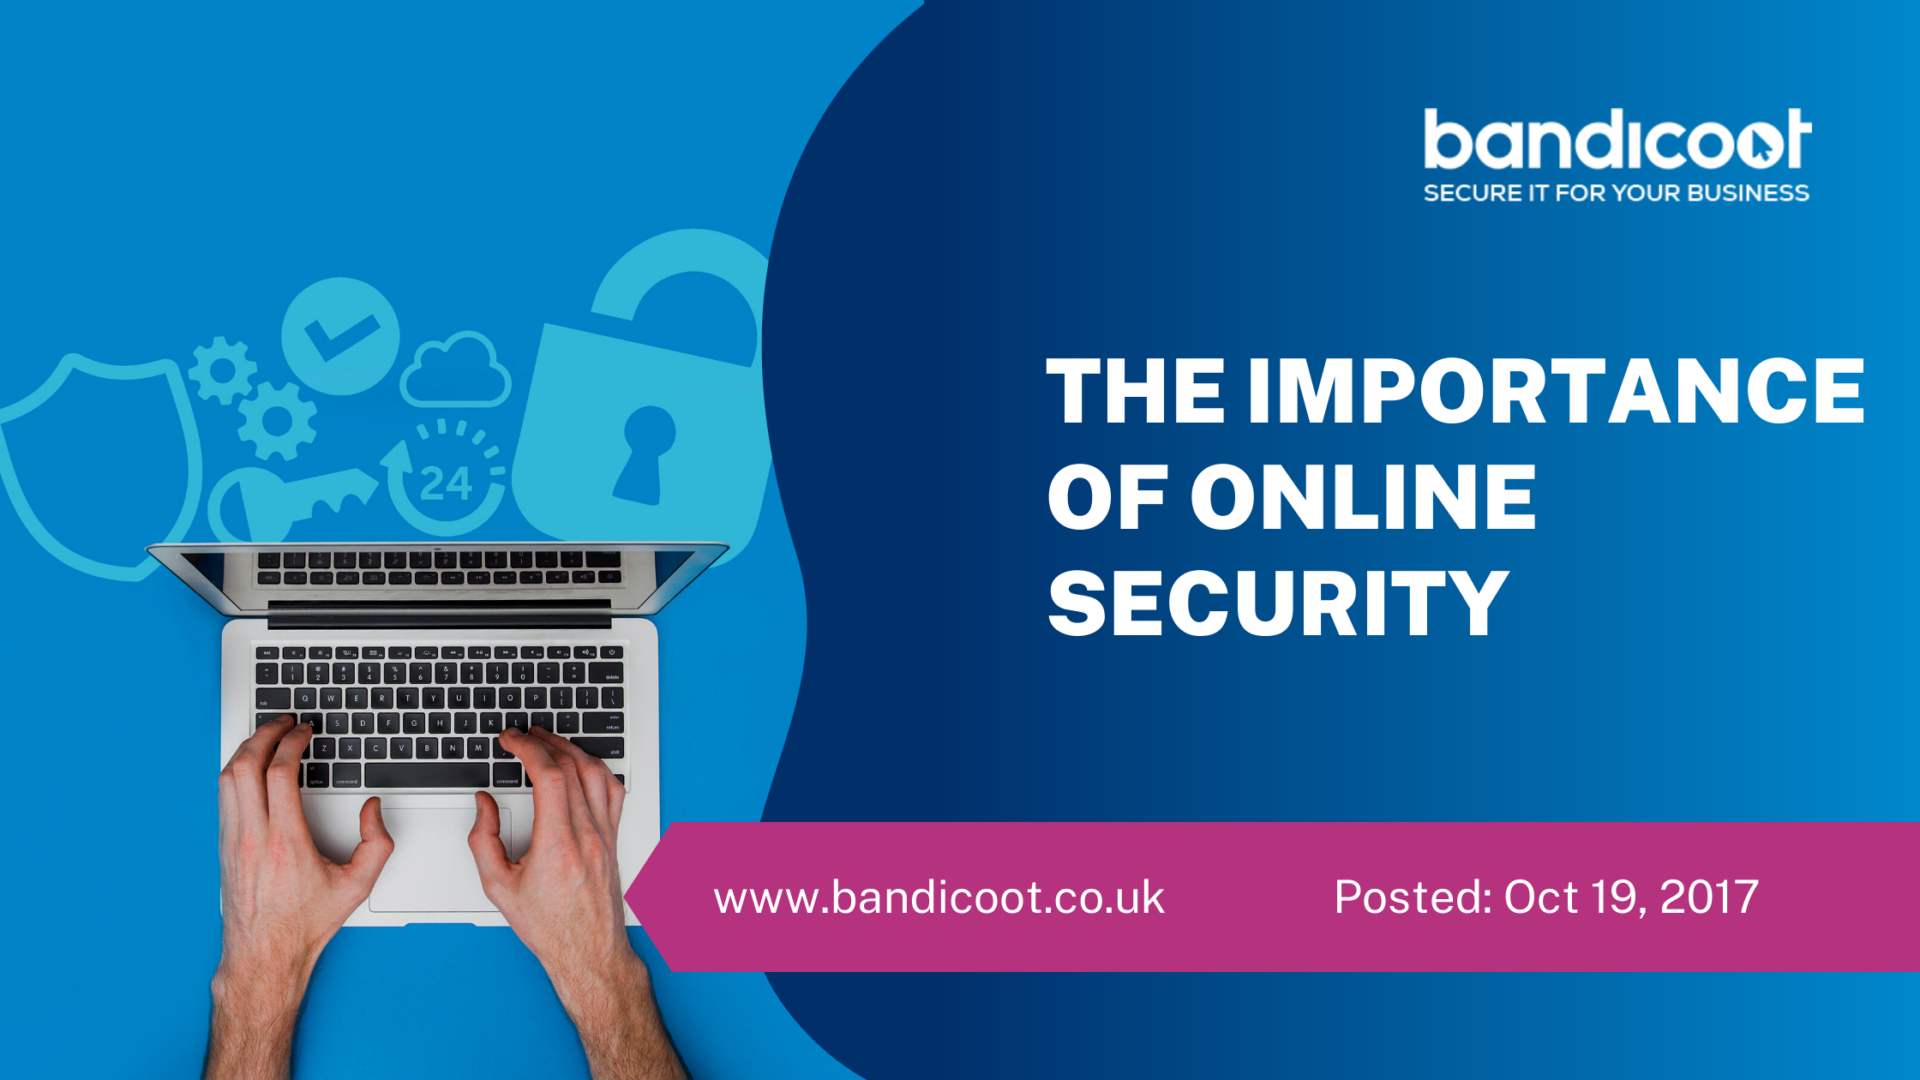 What is the importance of online security?